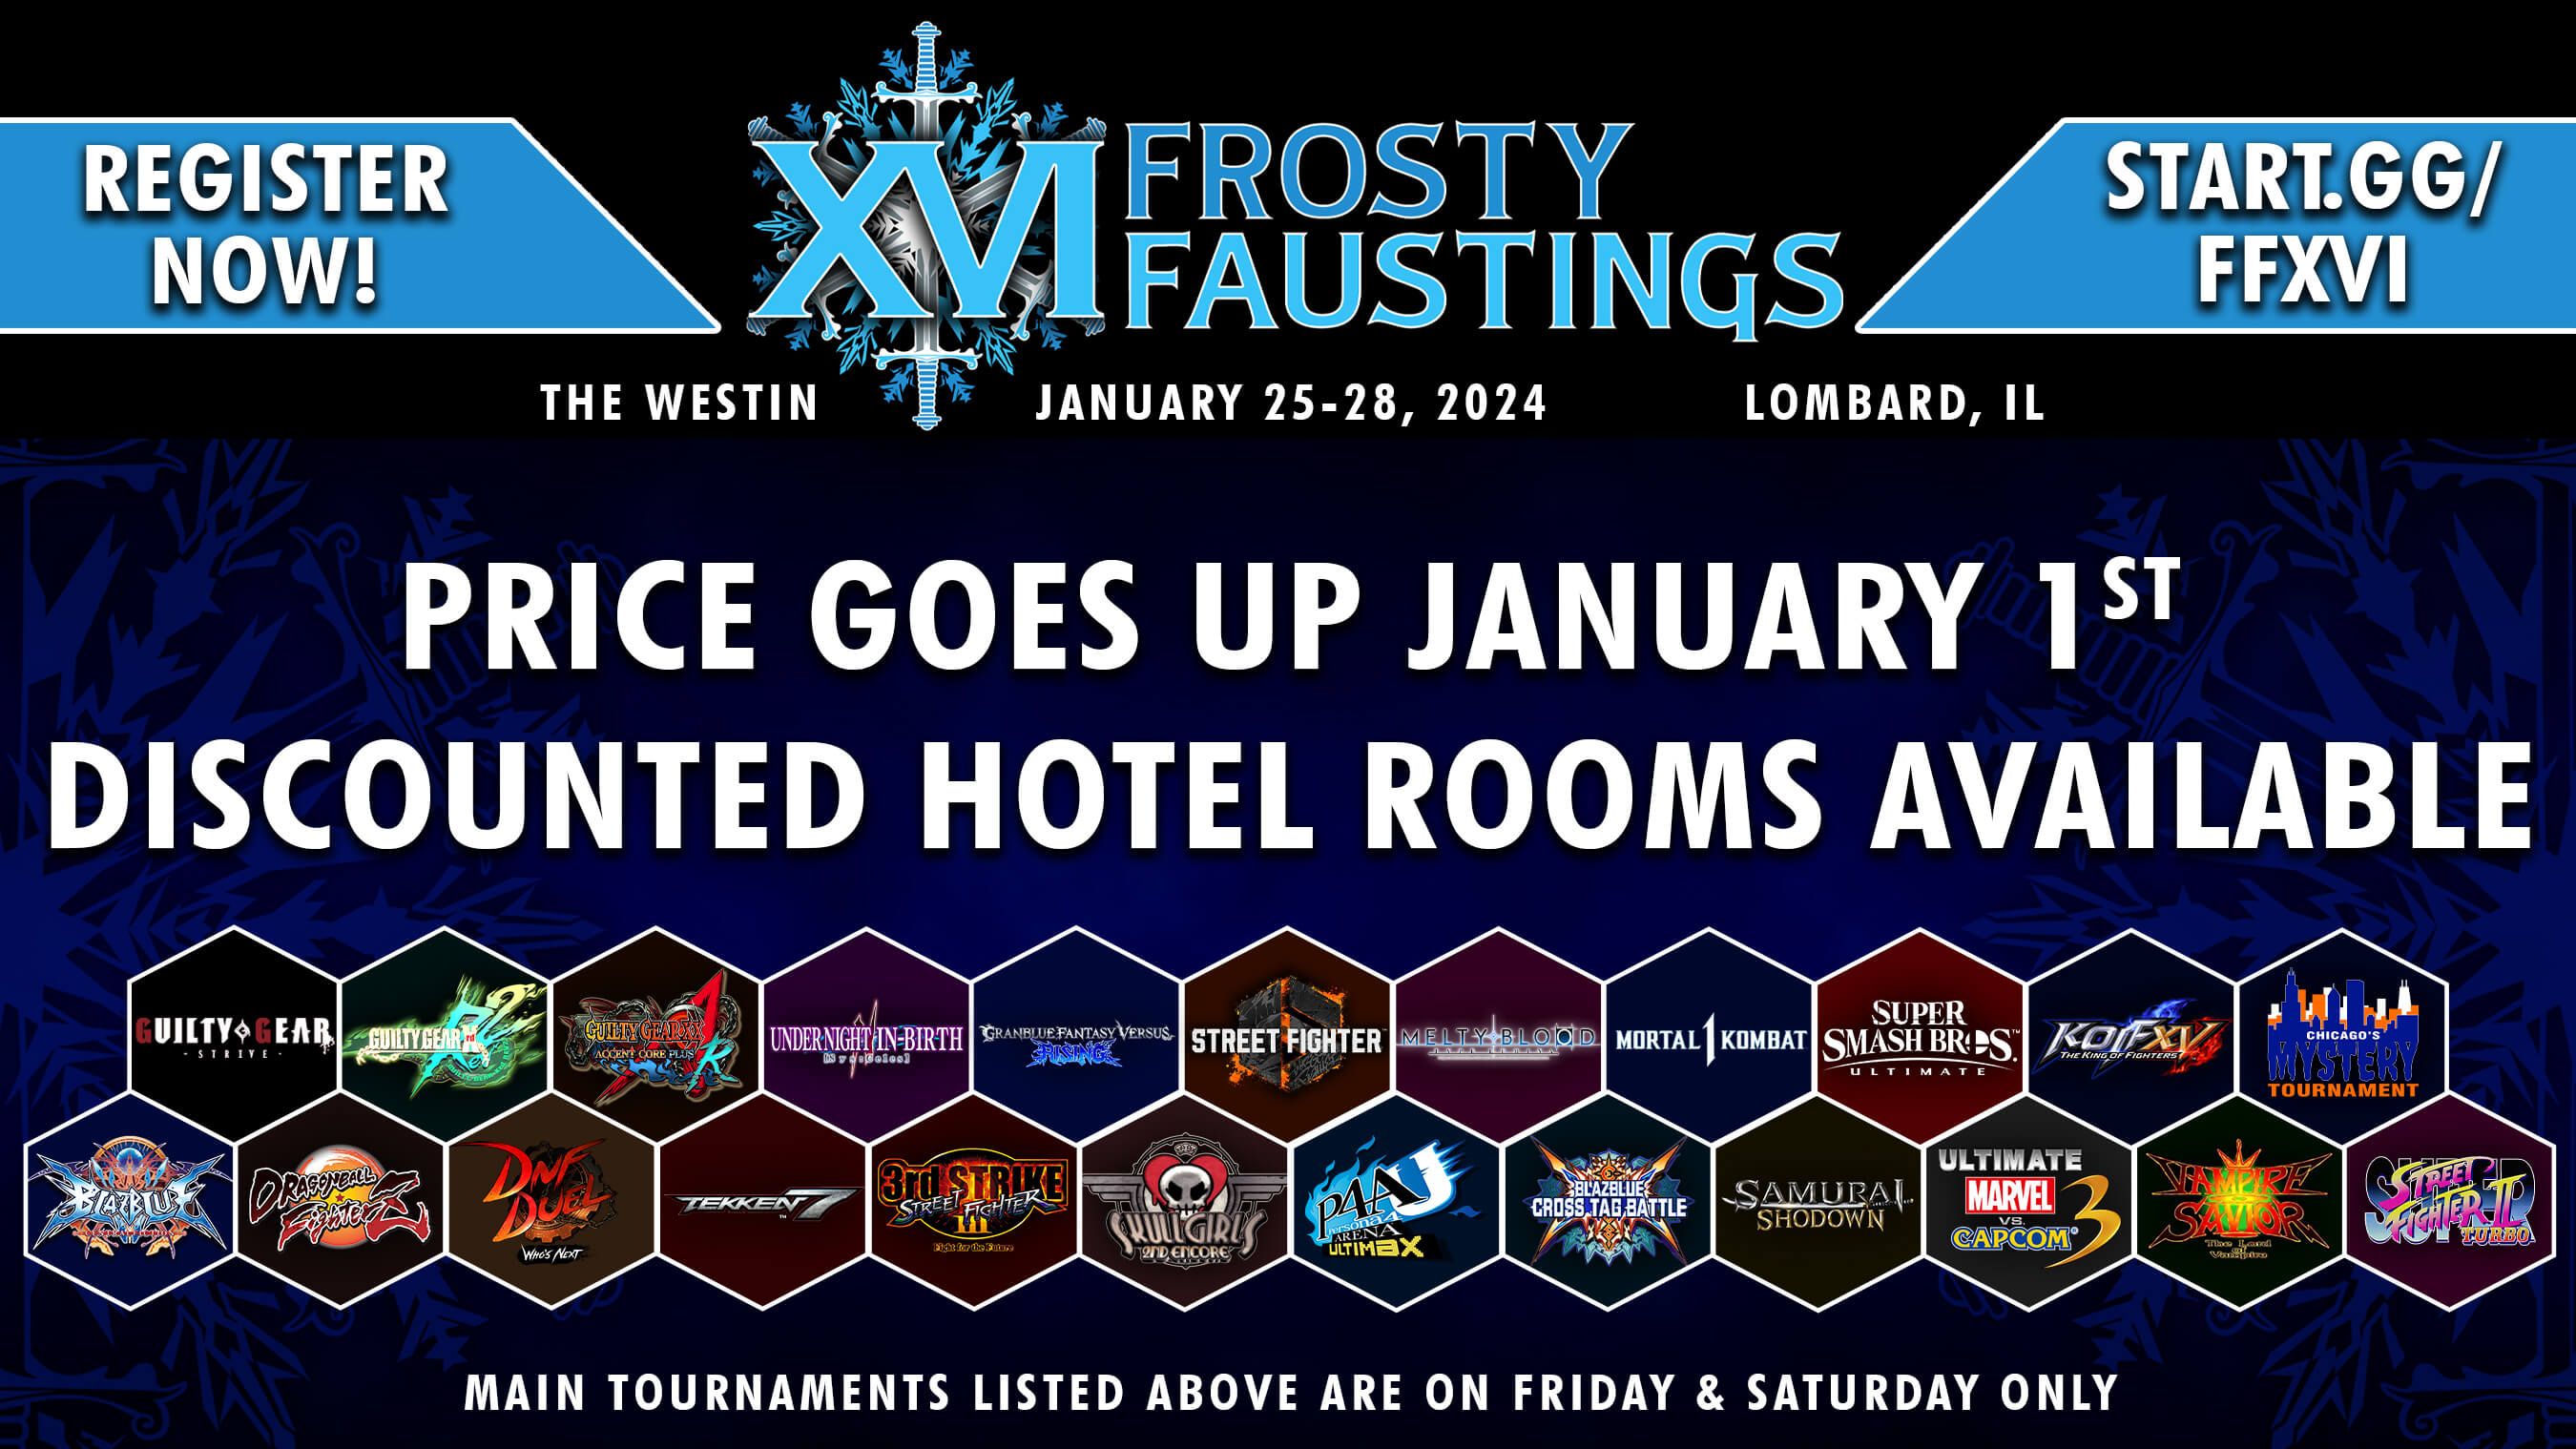 Last Chance to Register for Frosty Faustings XVI at a Discount